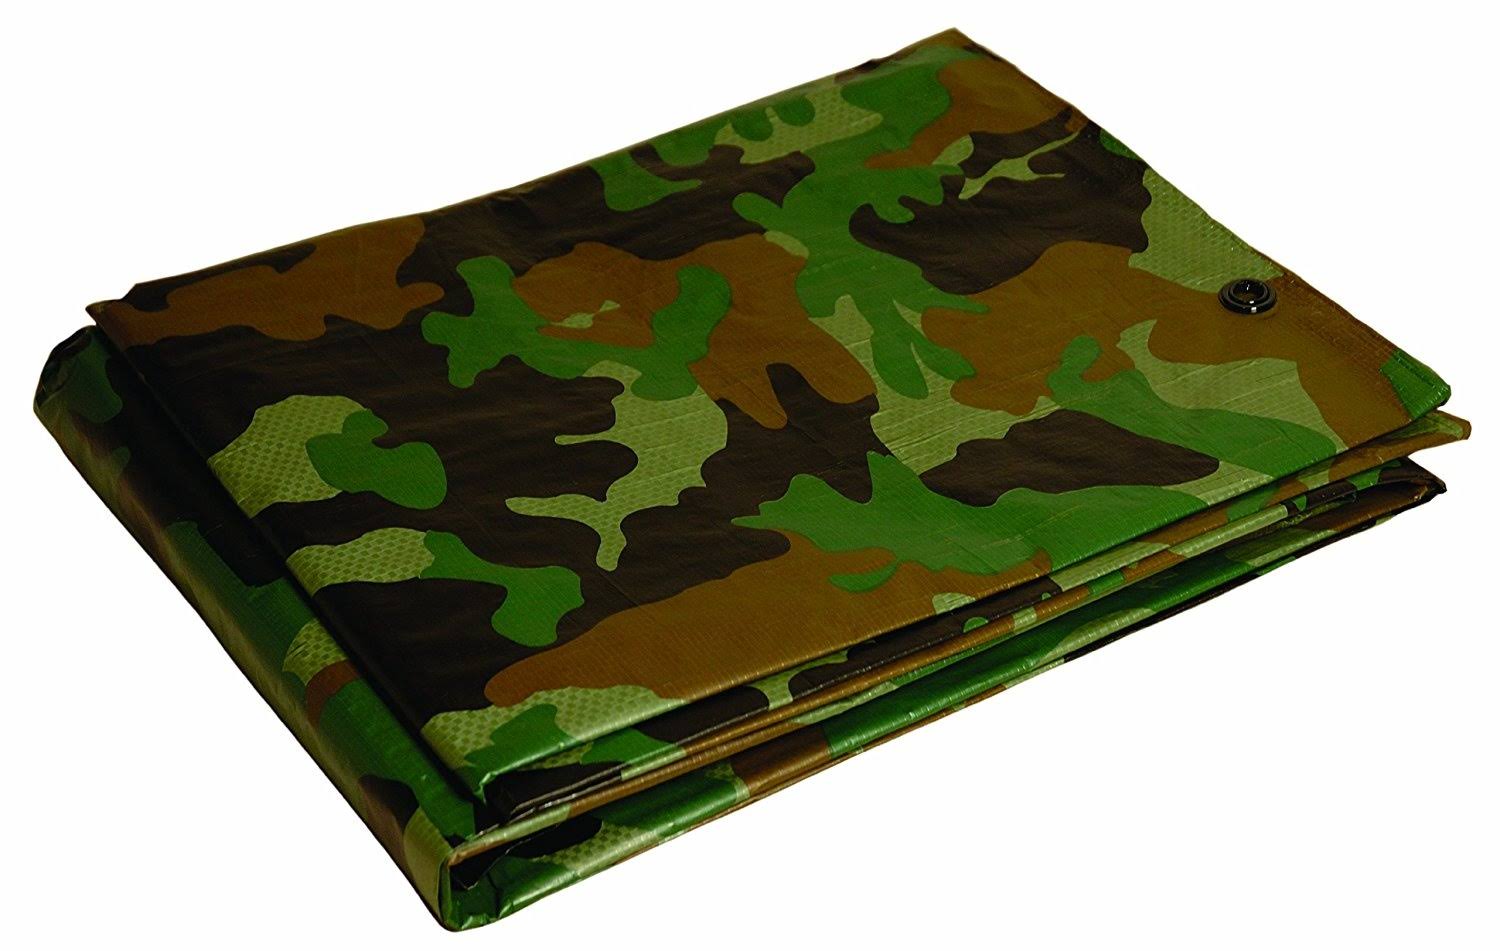 Foremost Dry Top Tarp Camouflage - Green